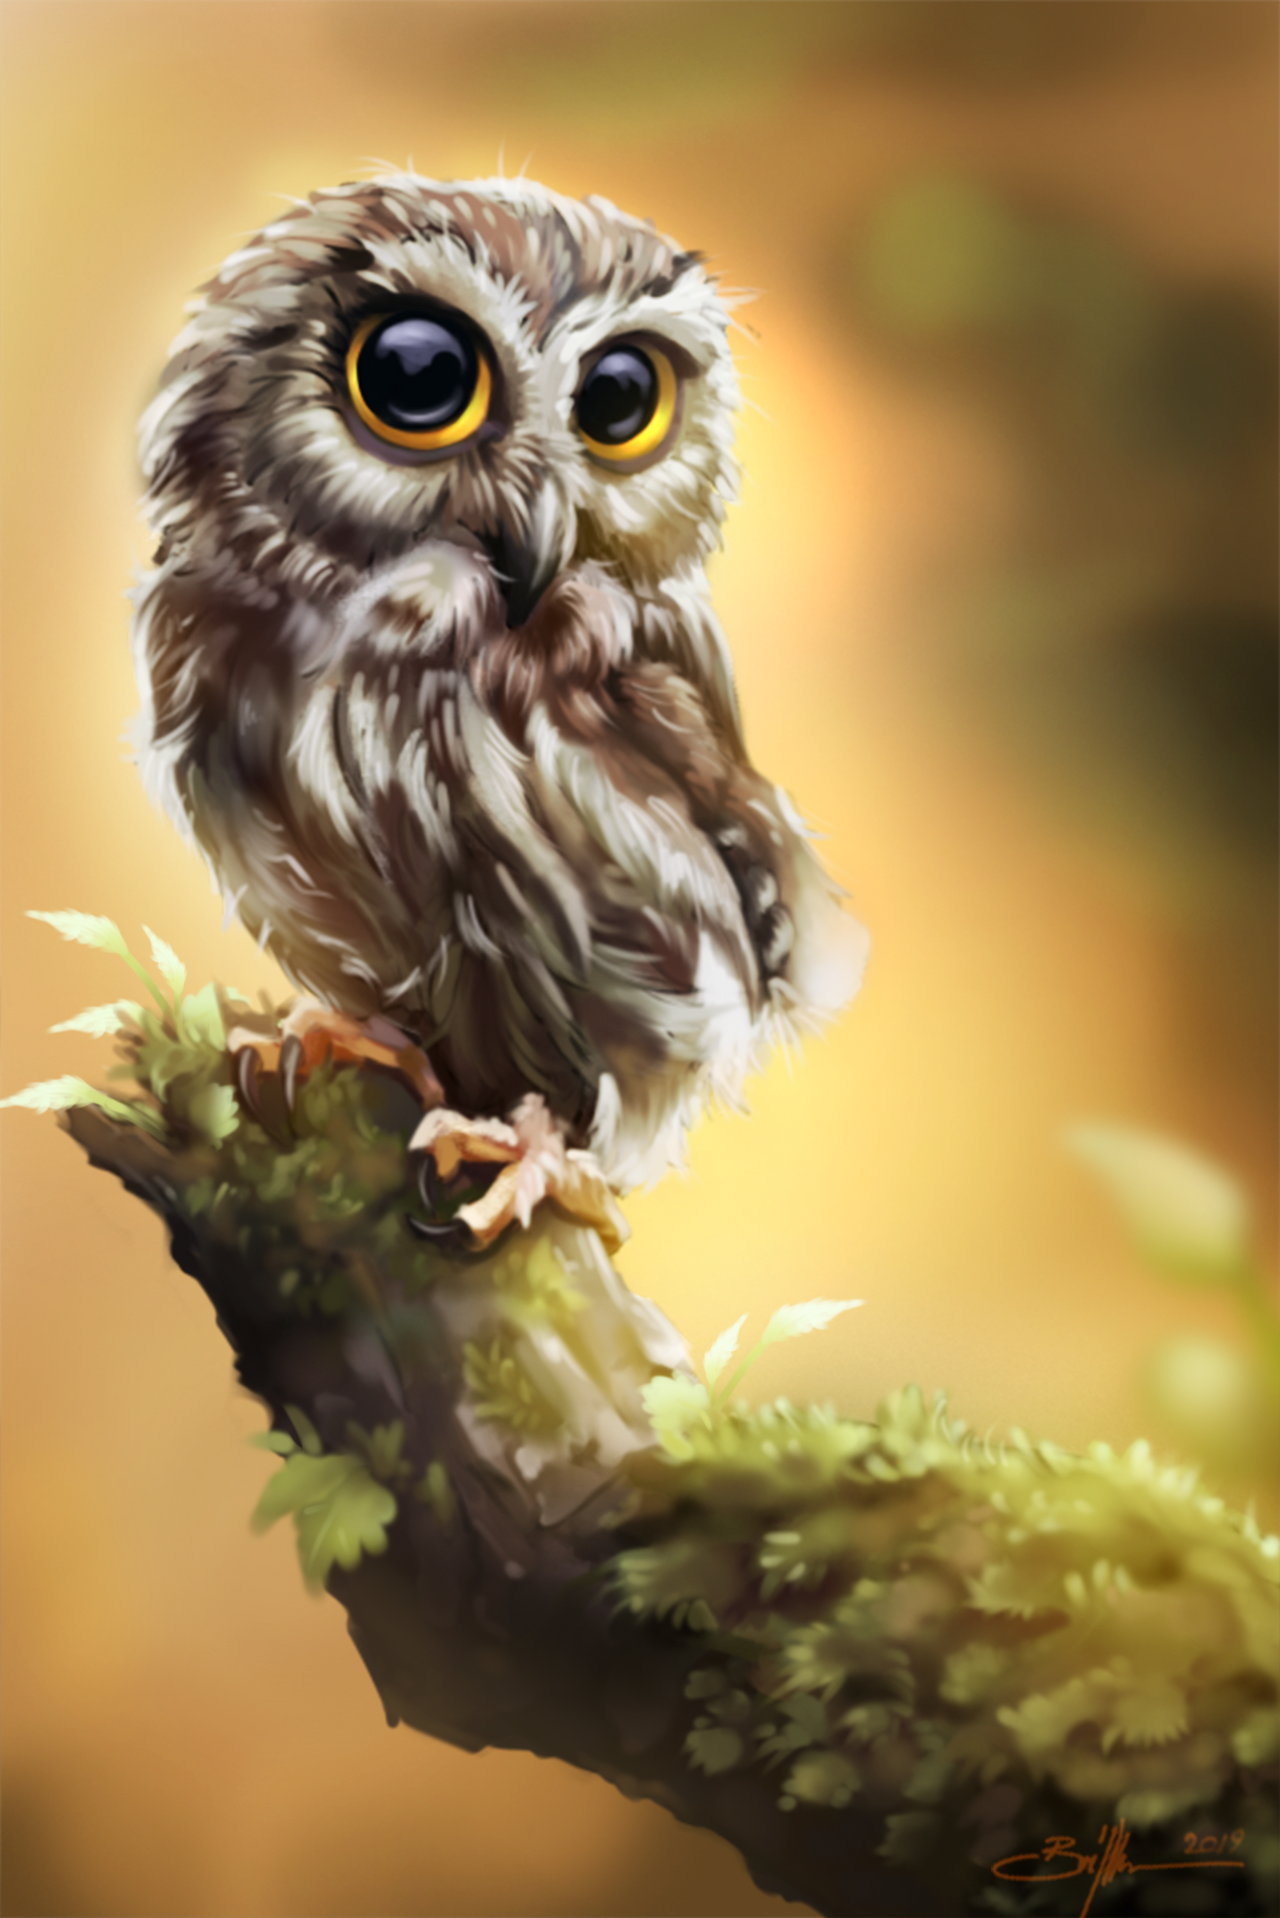 Owl by RebelRacoons on DeviantArt